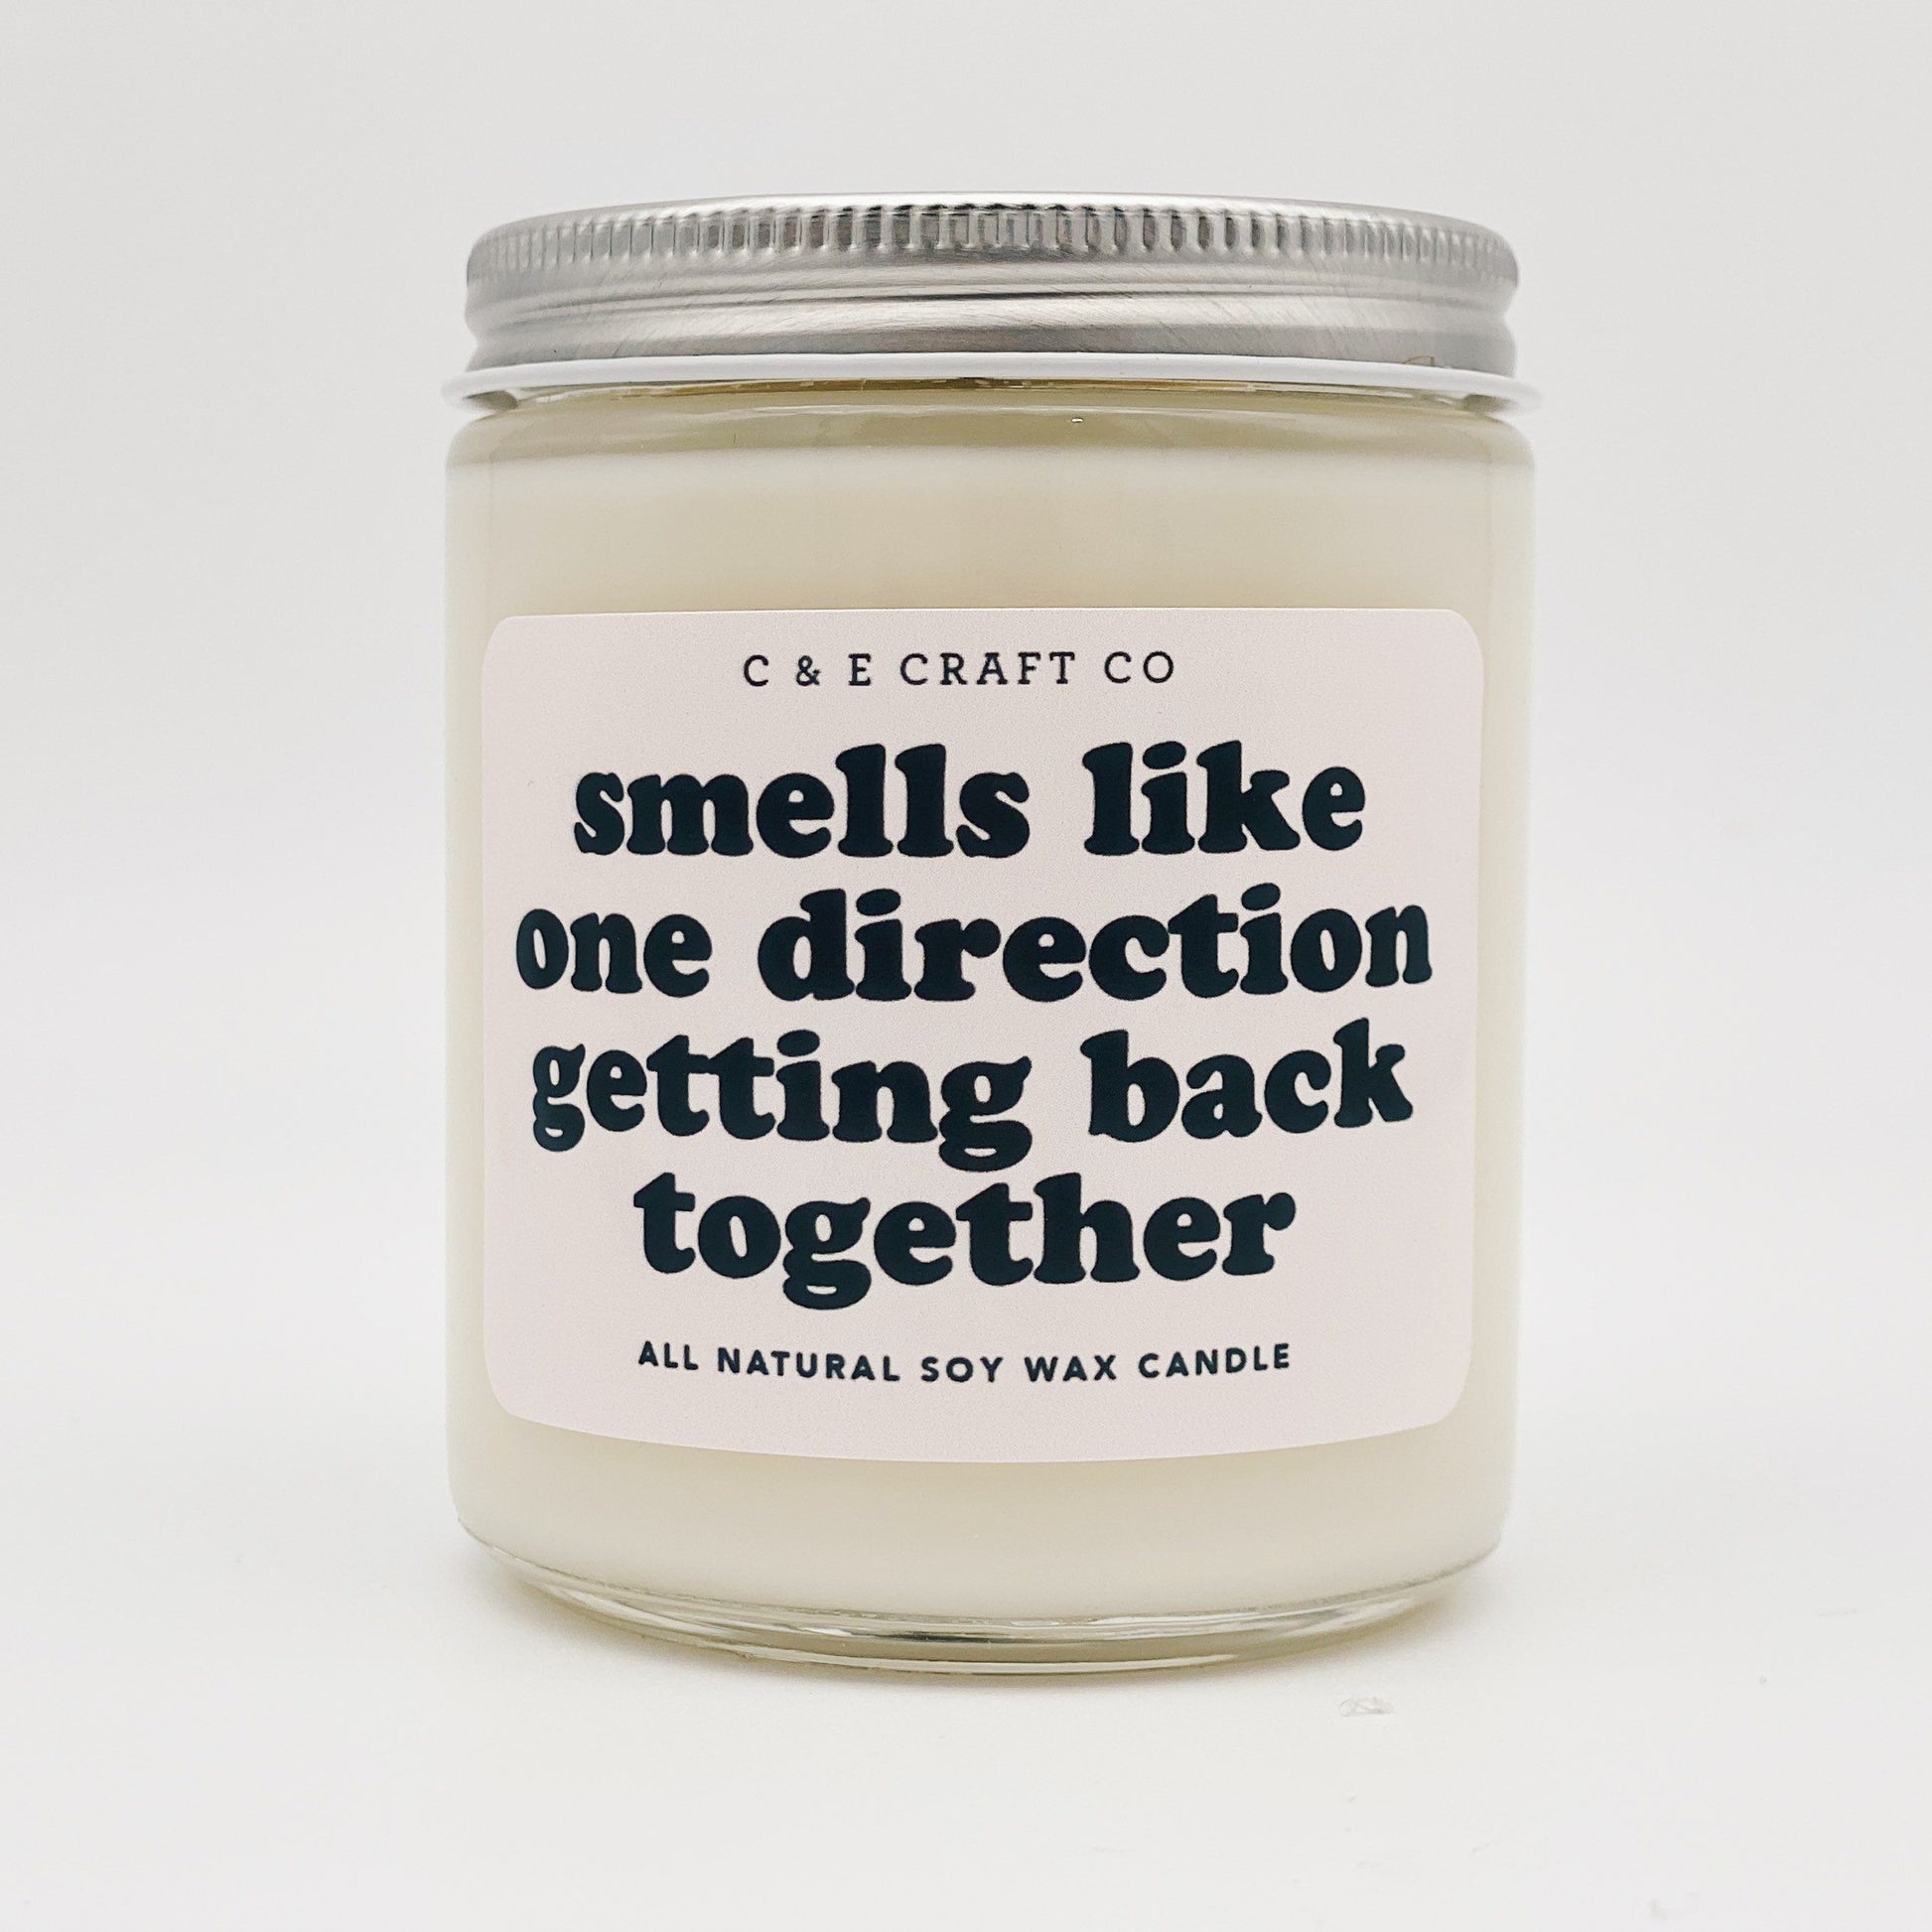 C&E - Smells Like One Direction Getting Back Together - Soy Wax Candle C & E Craft Co 